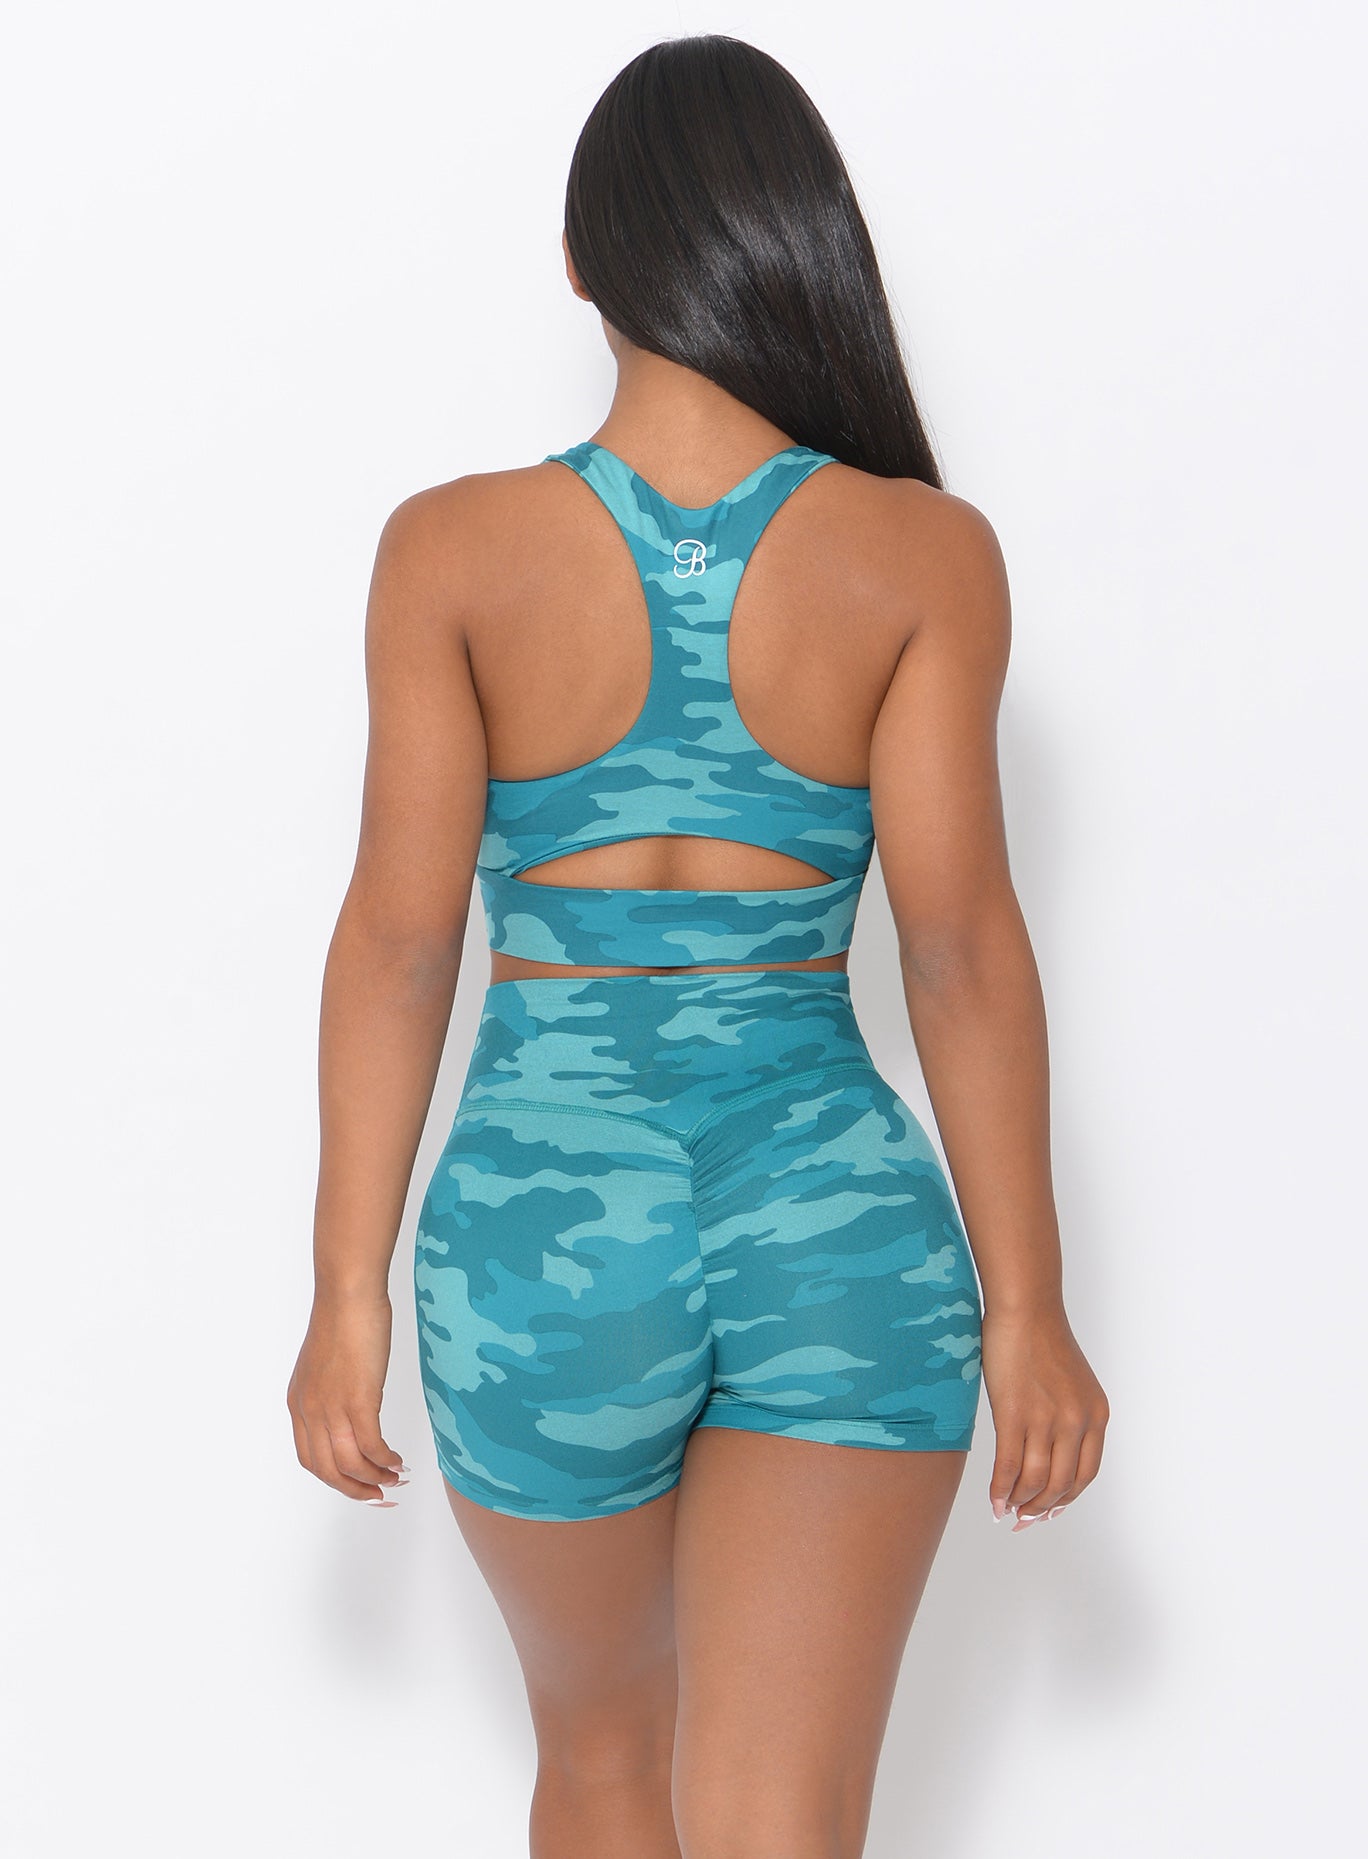 Back view of the model wearing our fit camo shorts in teal color and a matching bra 